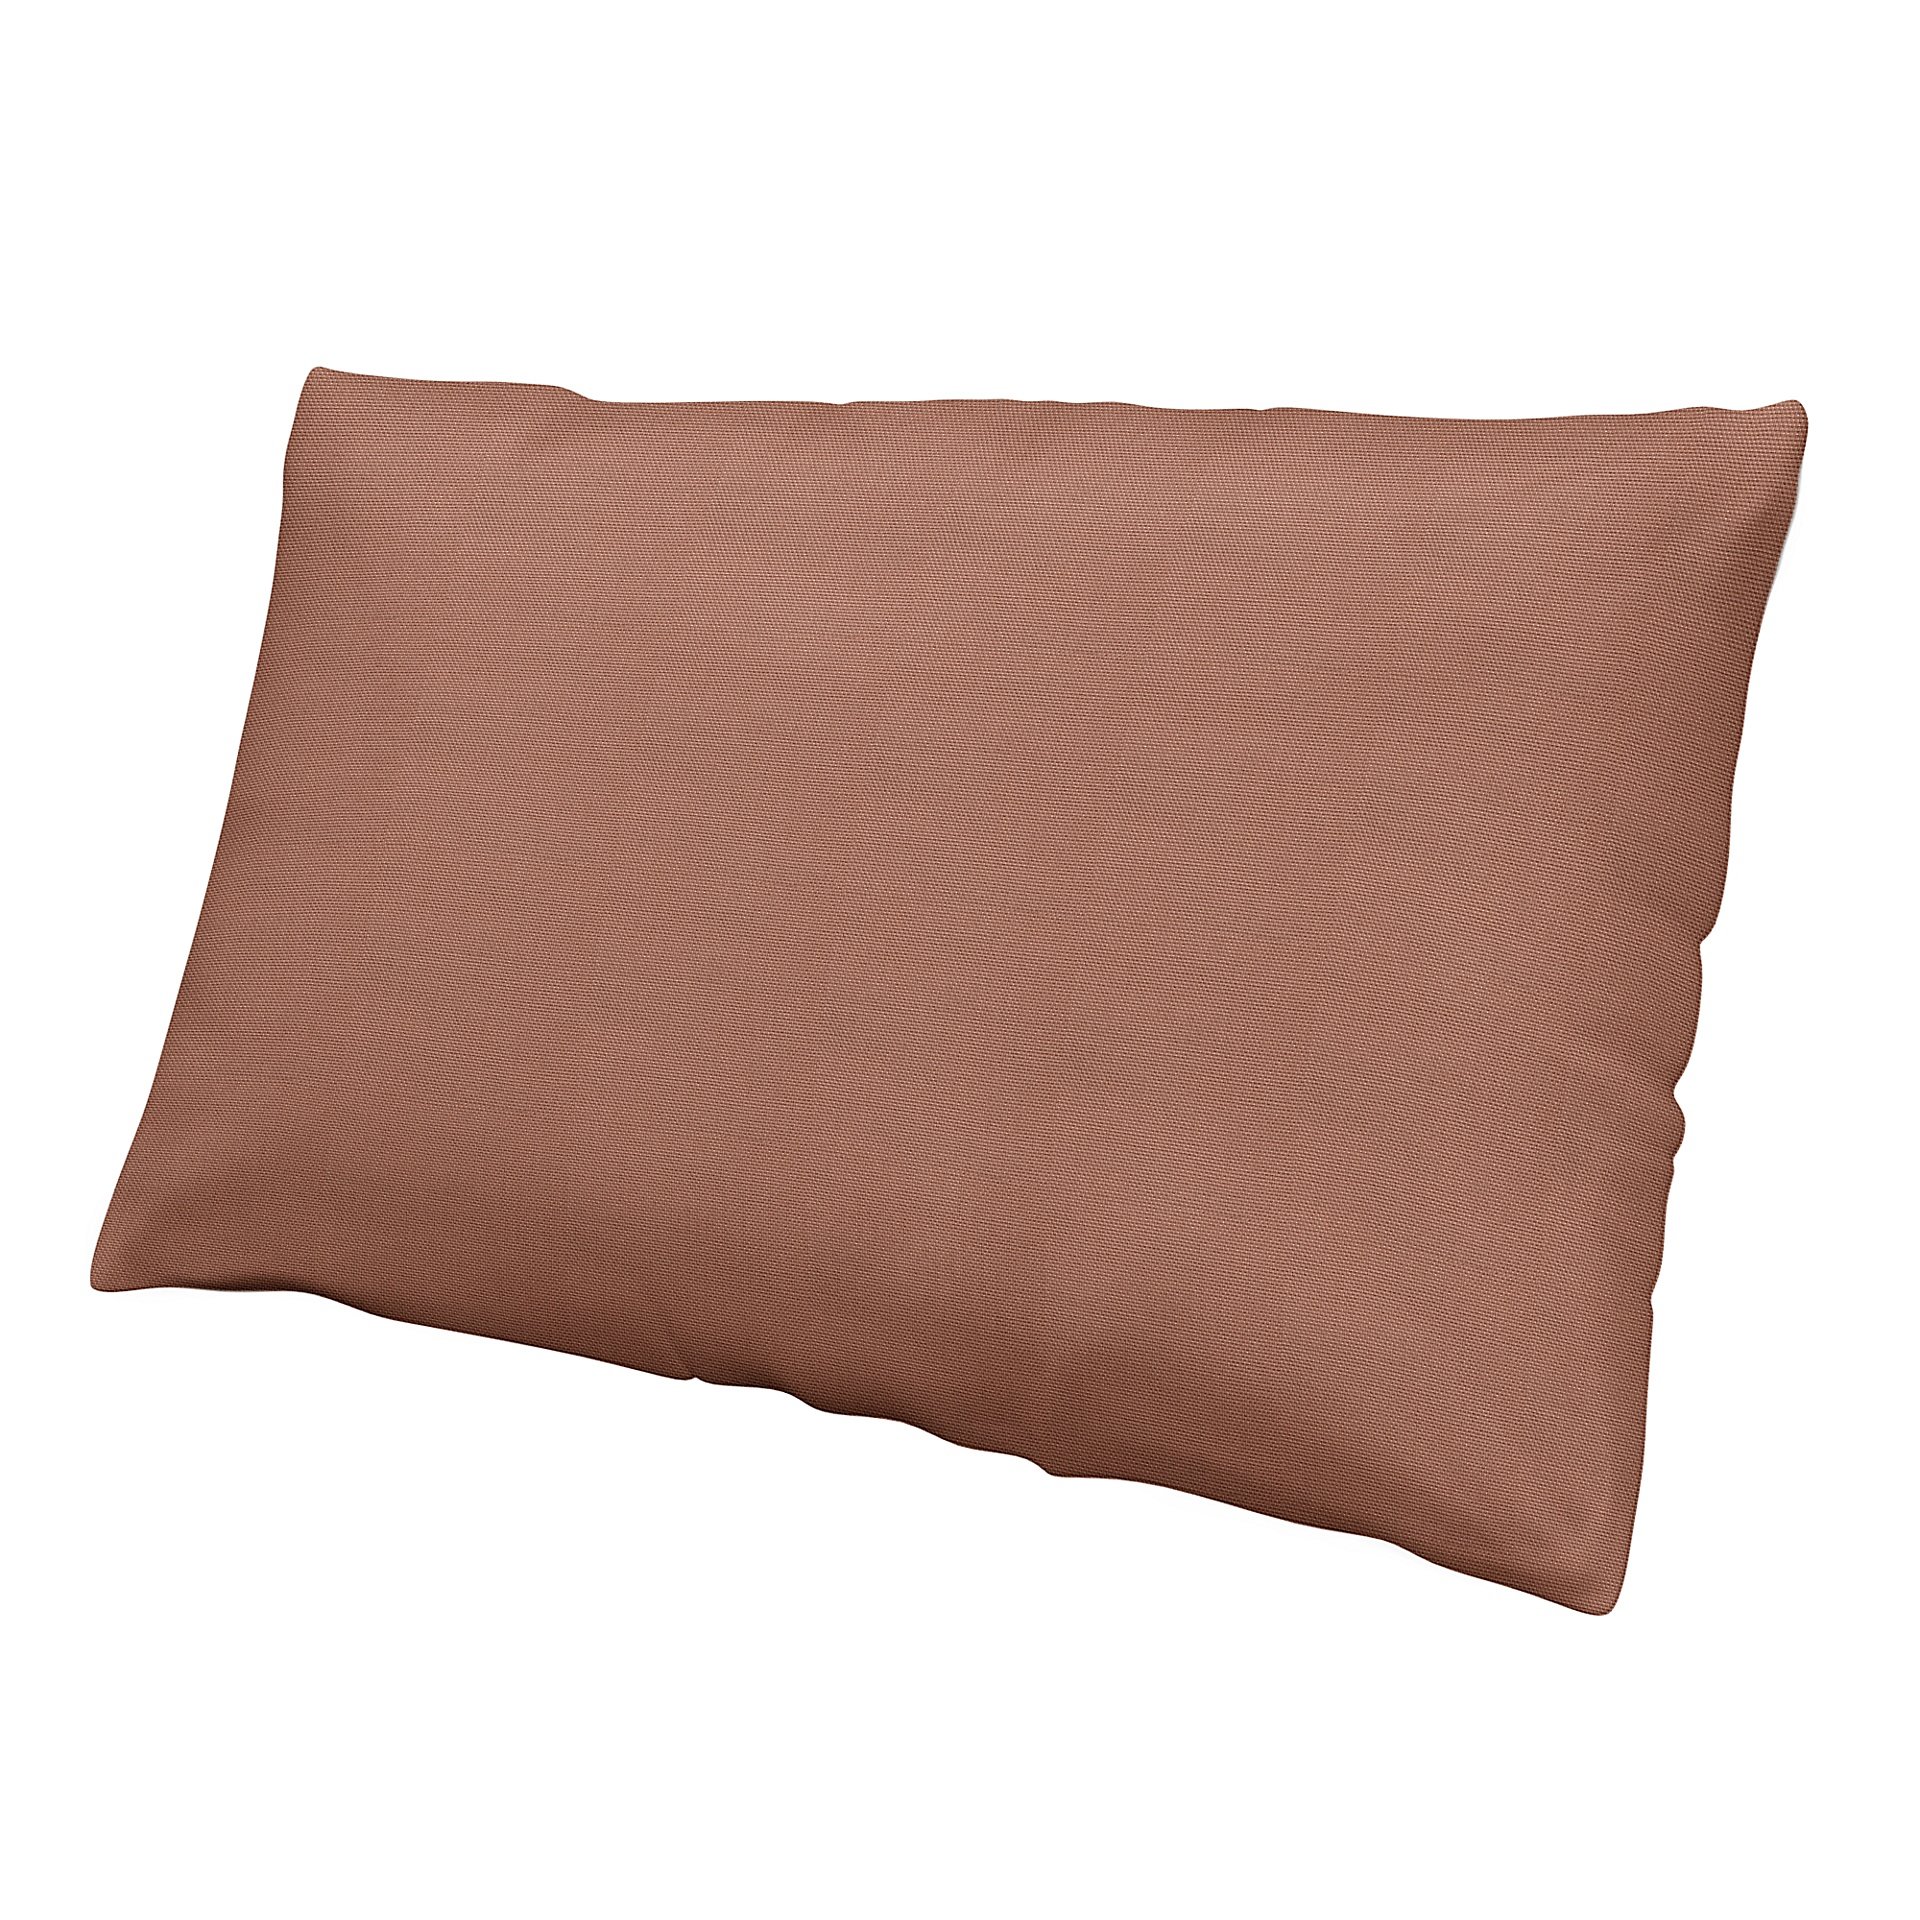 Cushion cover, Dusty Pink, Outdoor - Bemz